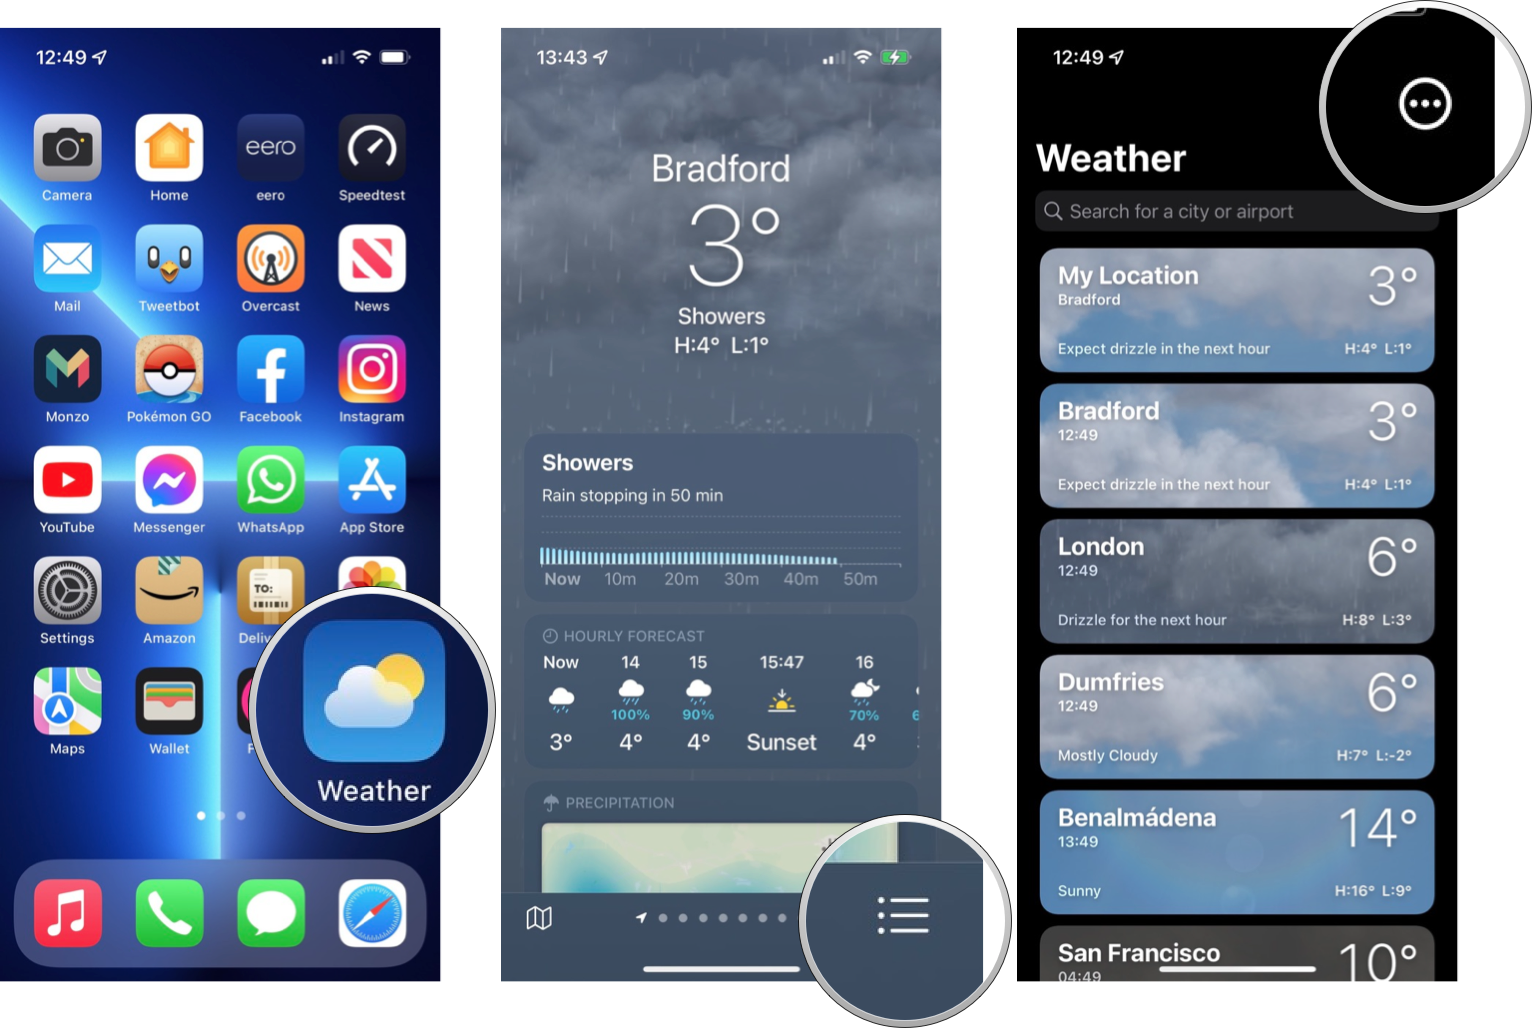 How to turn on precipitation notifications for Weather app: Open Weather, tap on the bulleted list icon, tap on the ellipsis icon